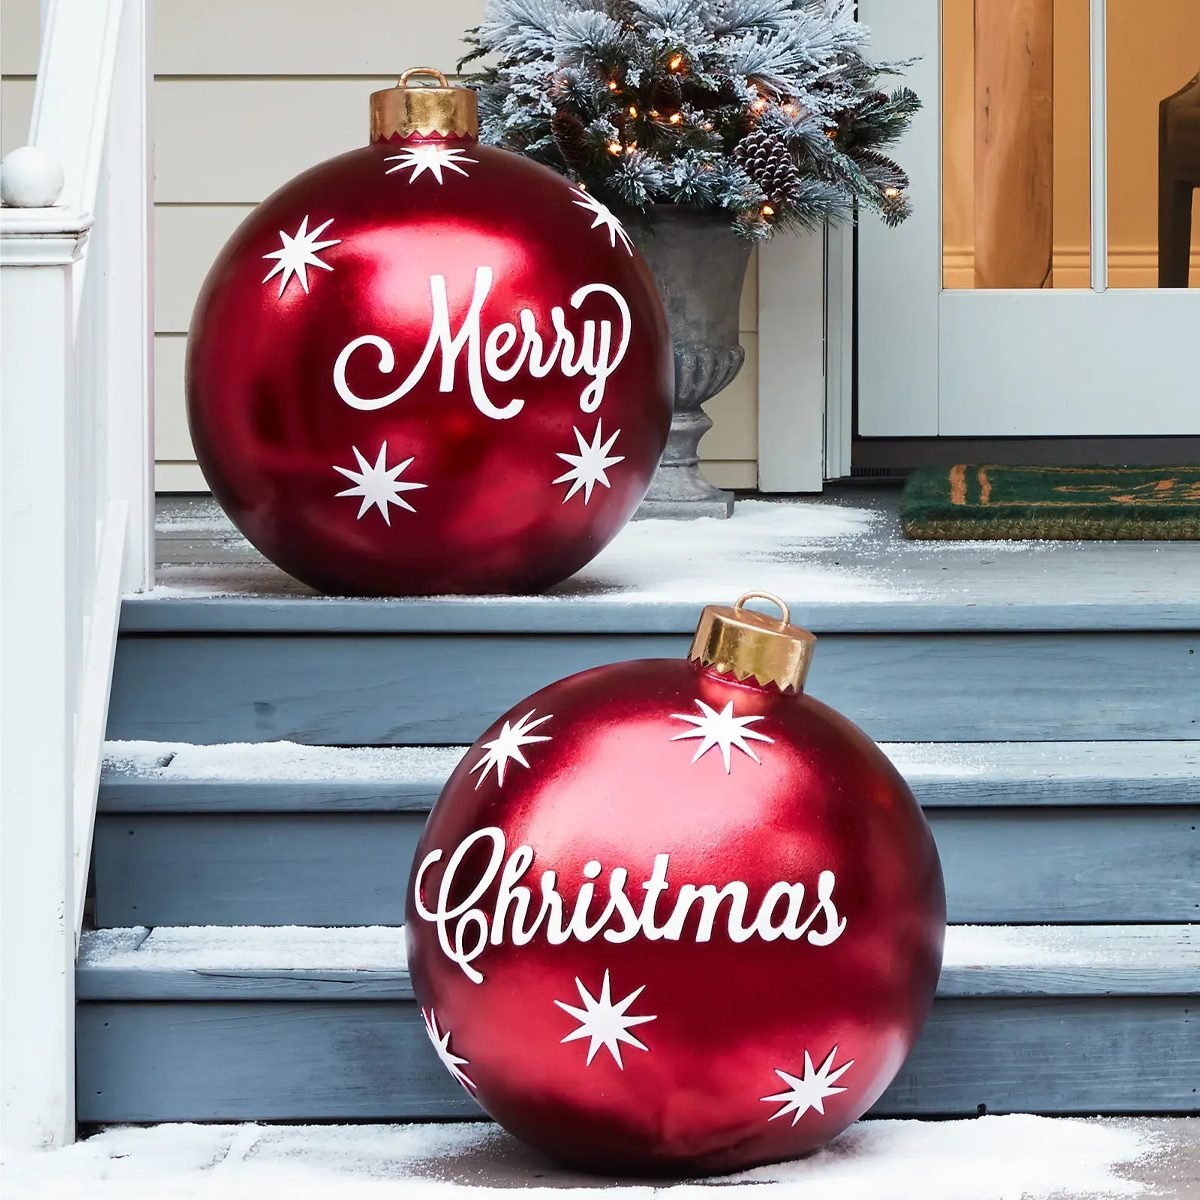 15 Best Outdoor Christmas Decorations for Your Yard in 2022